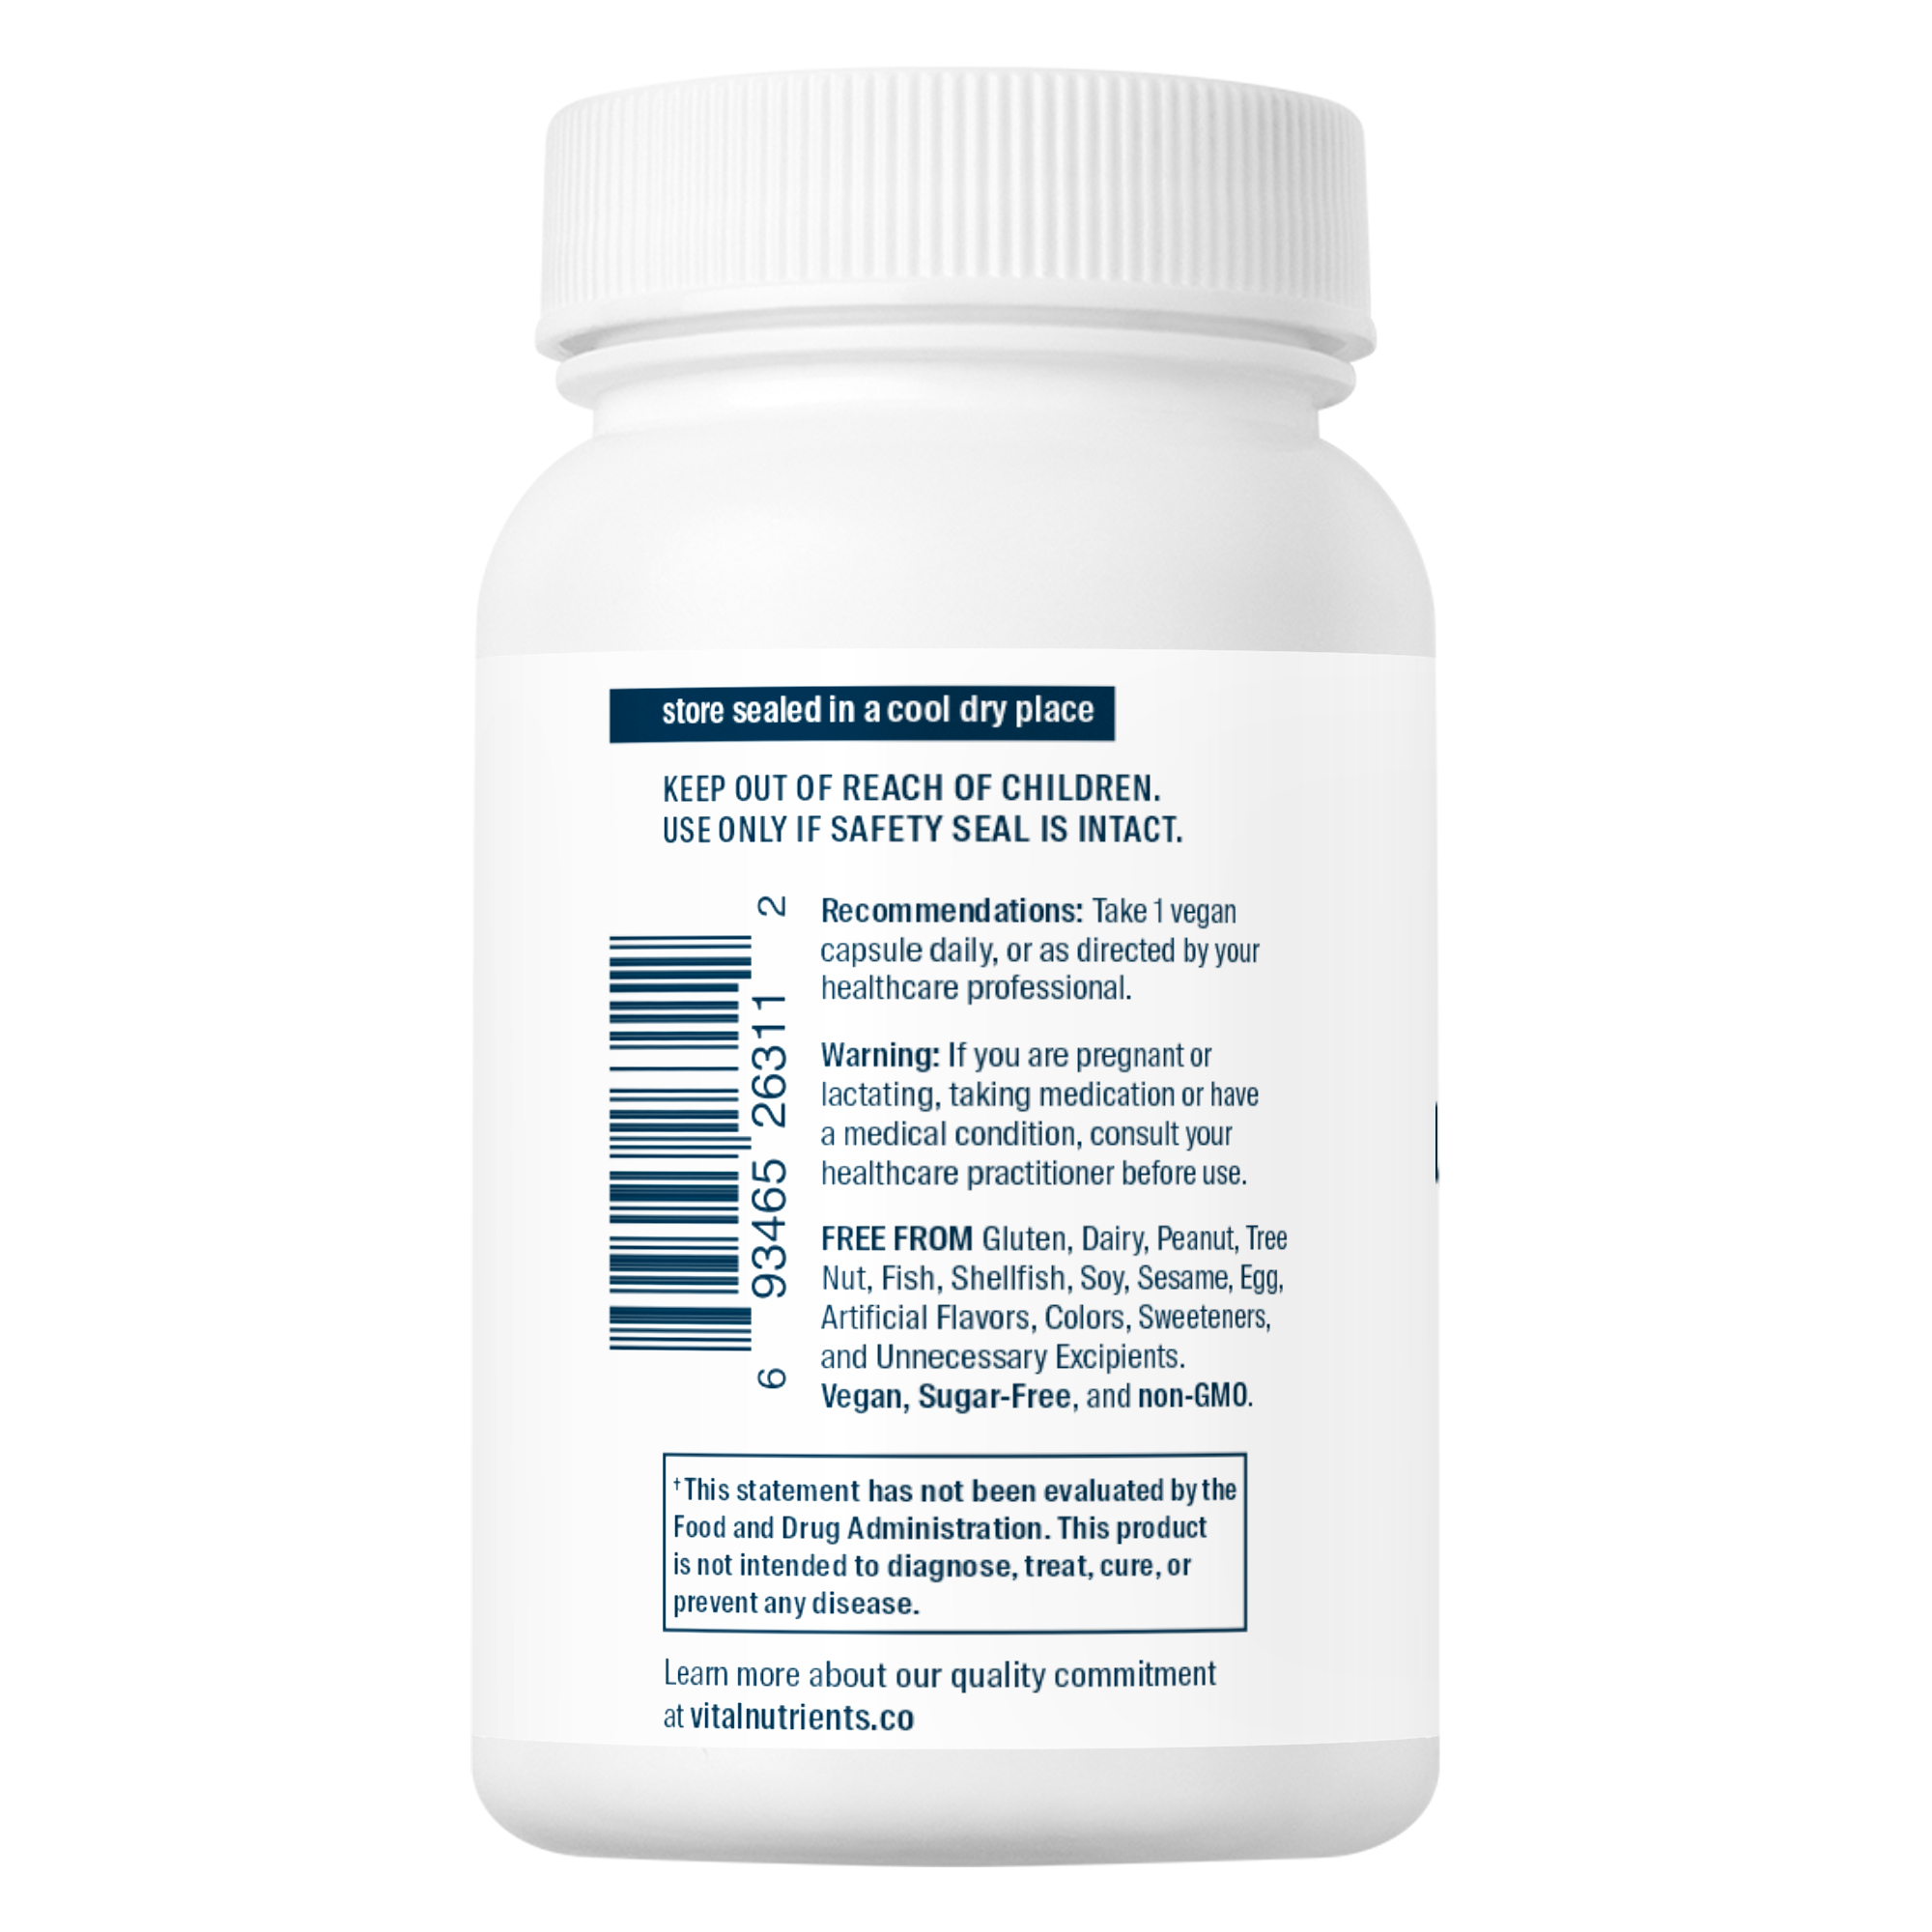 L-Theanine 200mg - 60 Capsules | Vital Nutrients